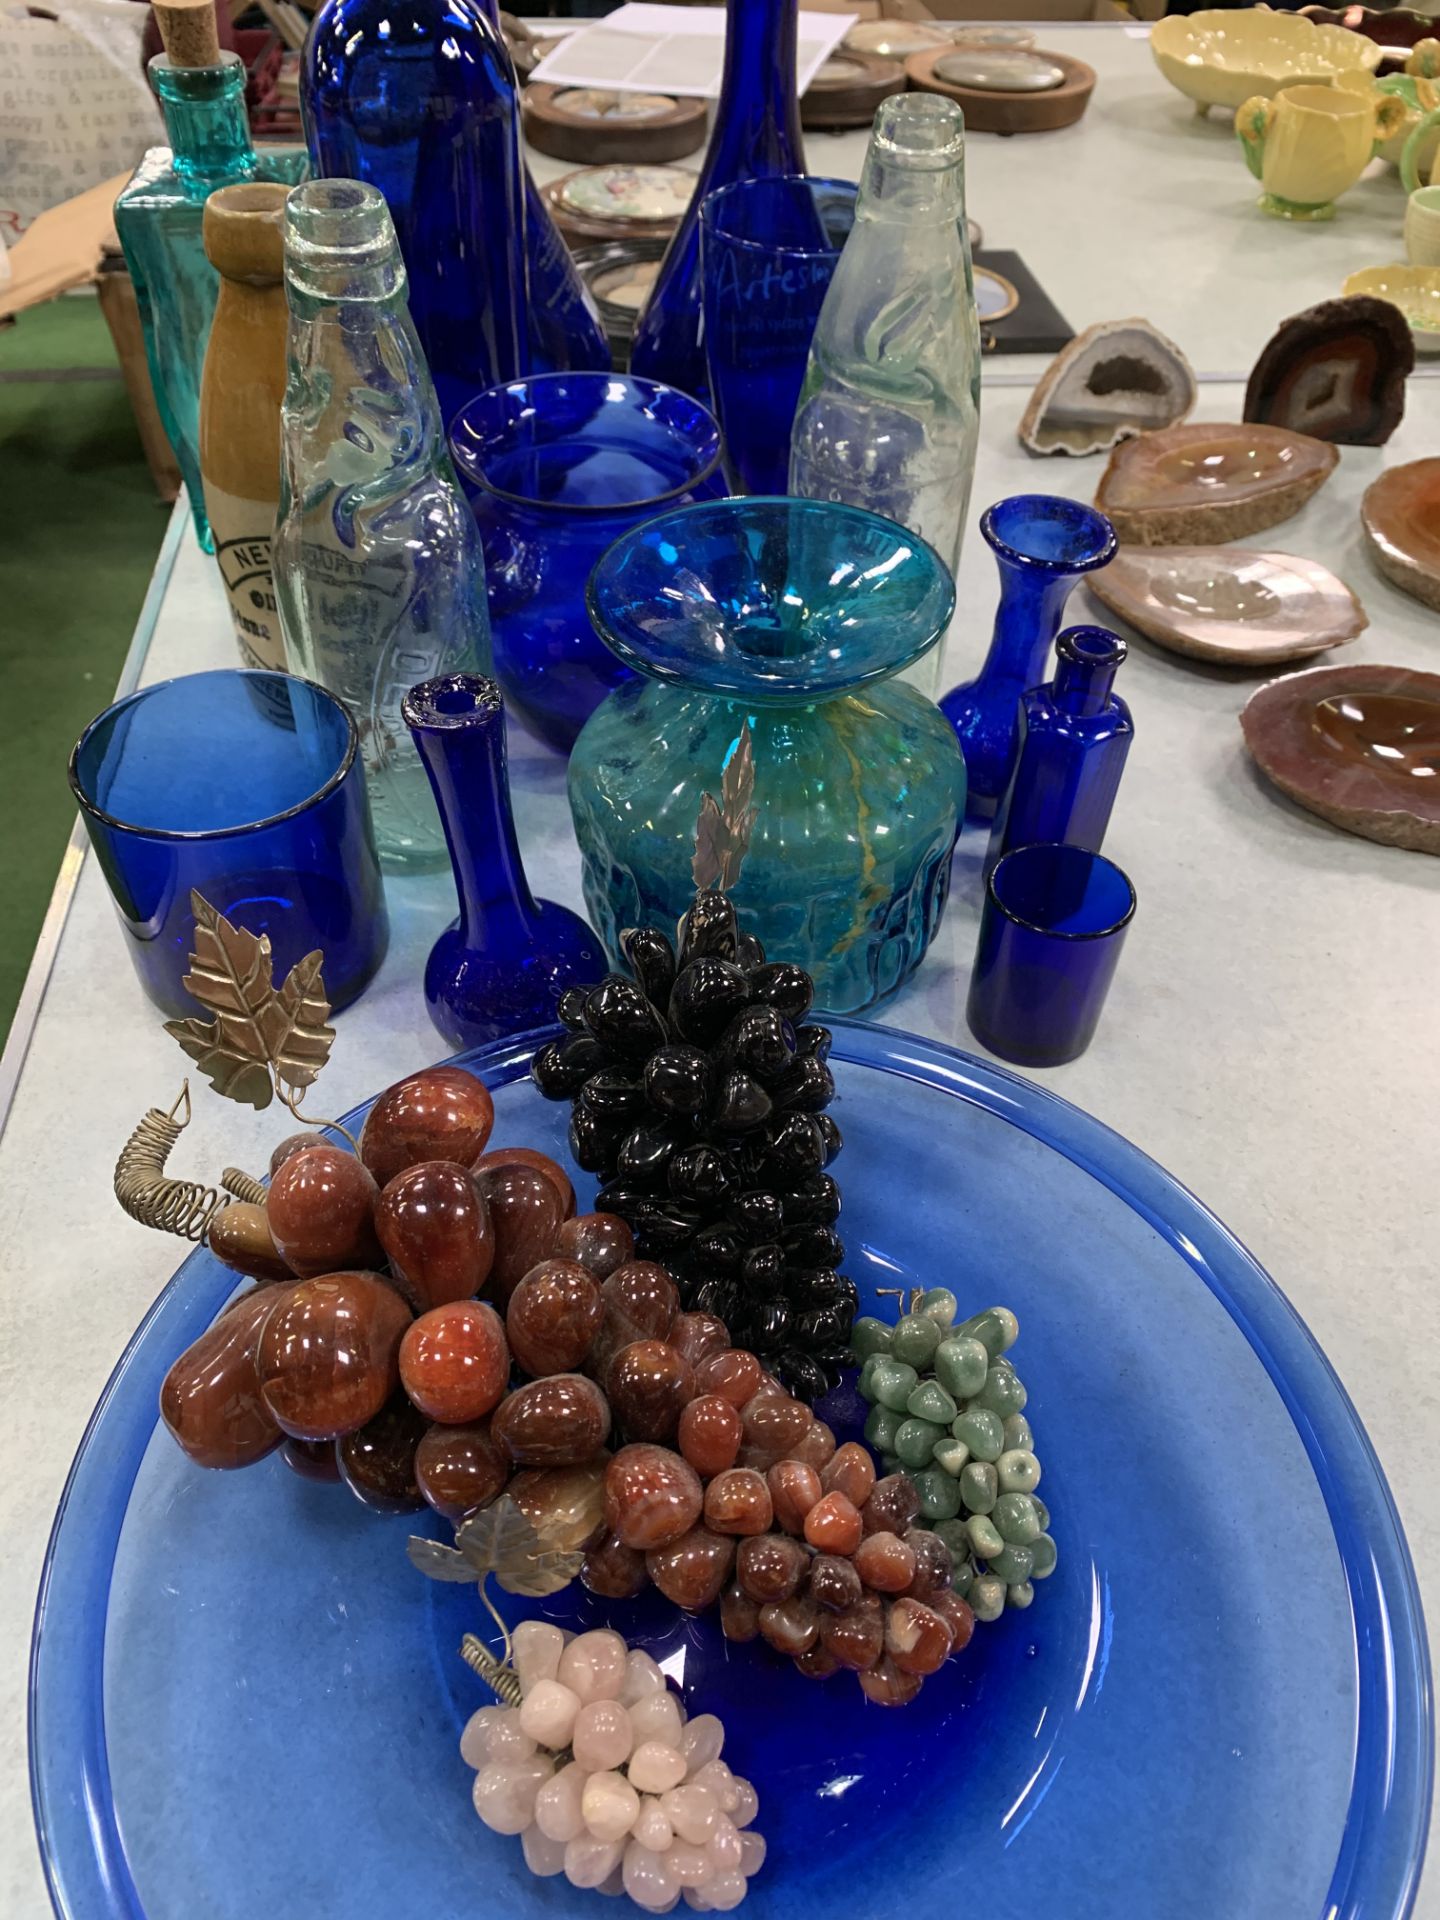 11 pieces of blue glass; 4 glass grape bunches; Art glass blue and yellow vase; and vintage bottles